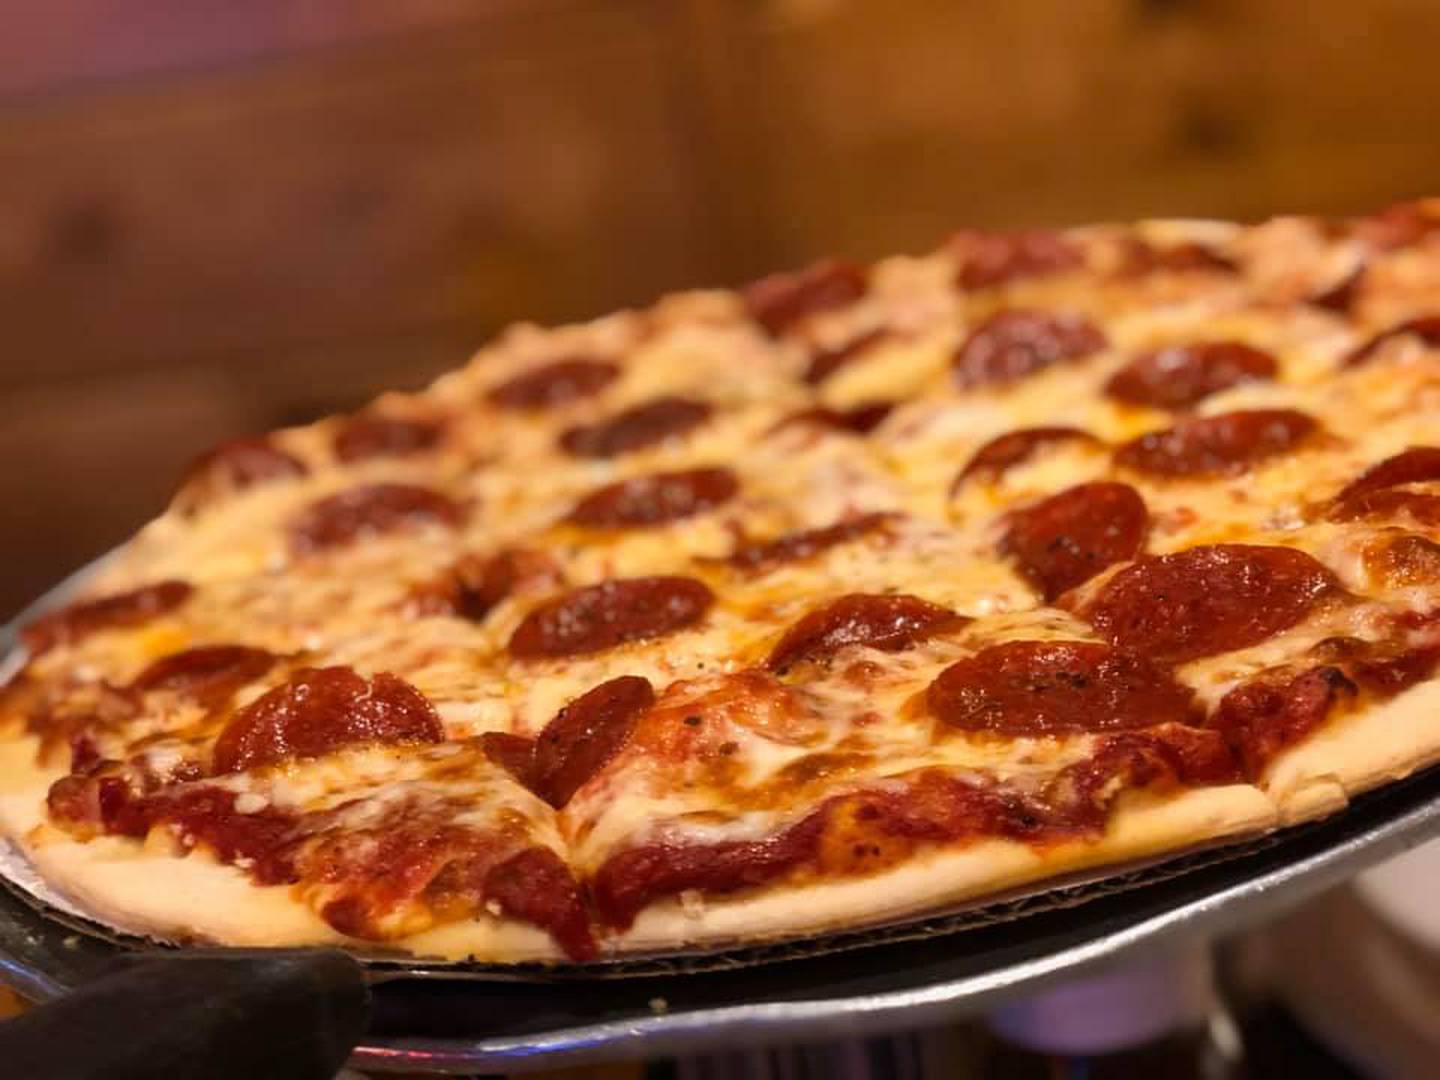 Charlie Fox's Pizzeria was voted by our Best of the Fox Readers for the best thin crust pizza in Kane County in 2021. It was also voted one of the best restaurants for deep dish pizza in Kane County. (Photo from Charlie Fox's Pizzeria Facebook page)